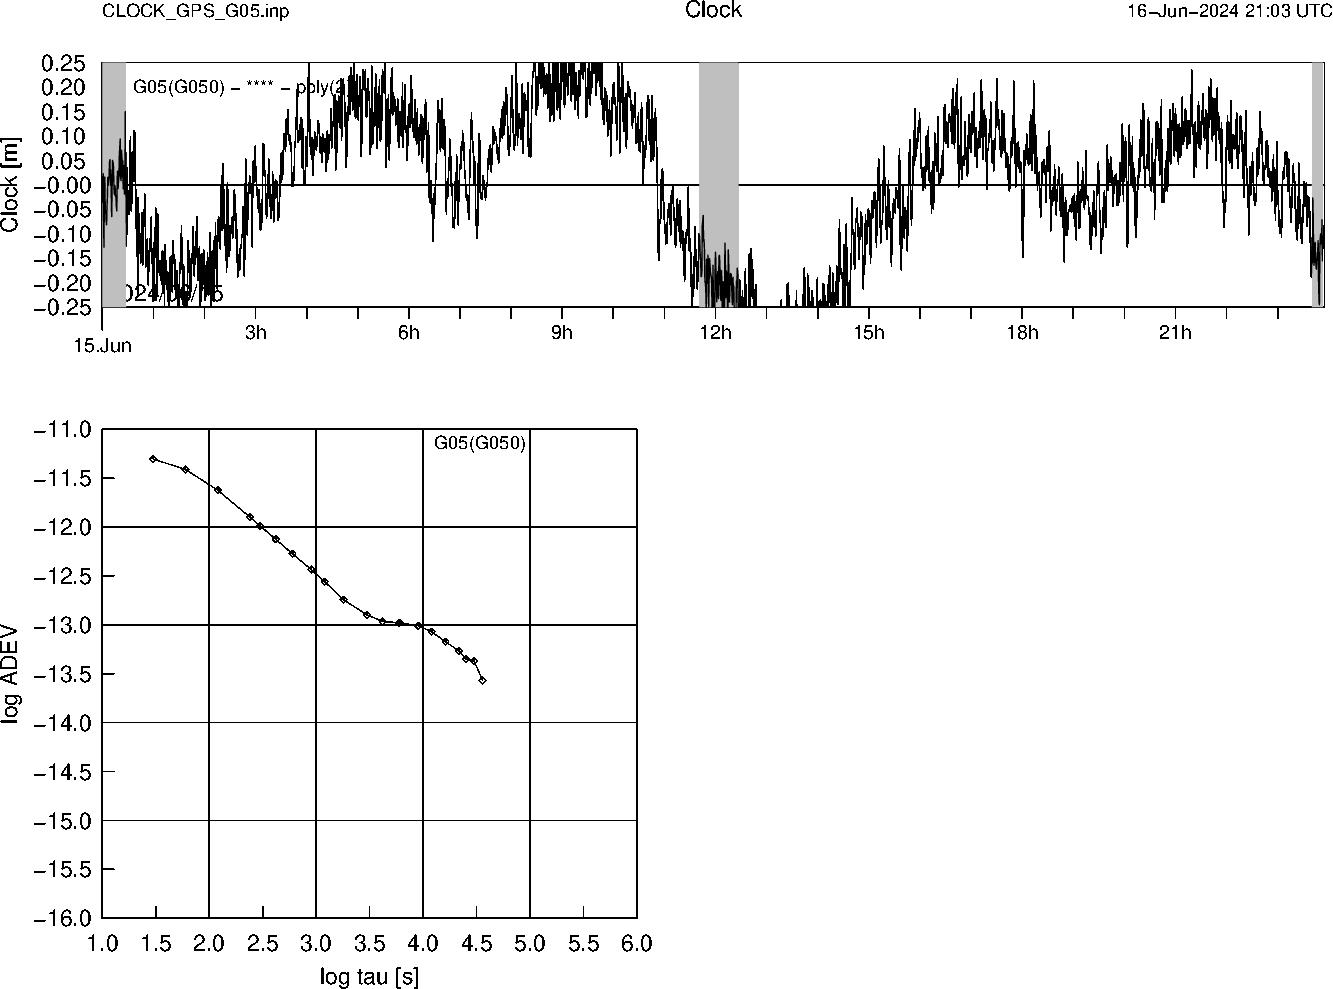 GPS G05 Clock Time Series and Allan Deviation